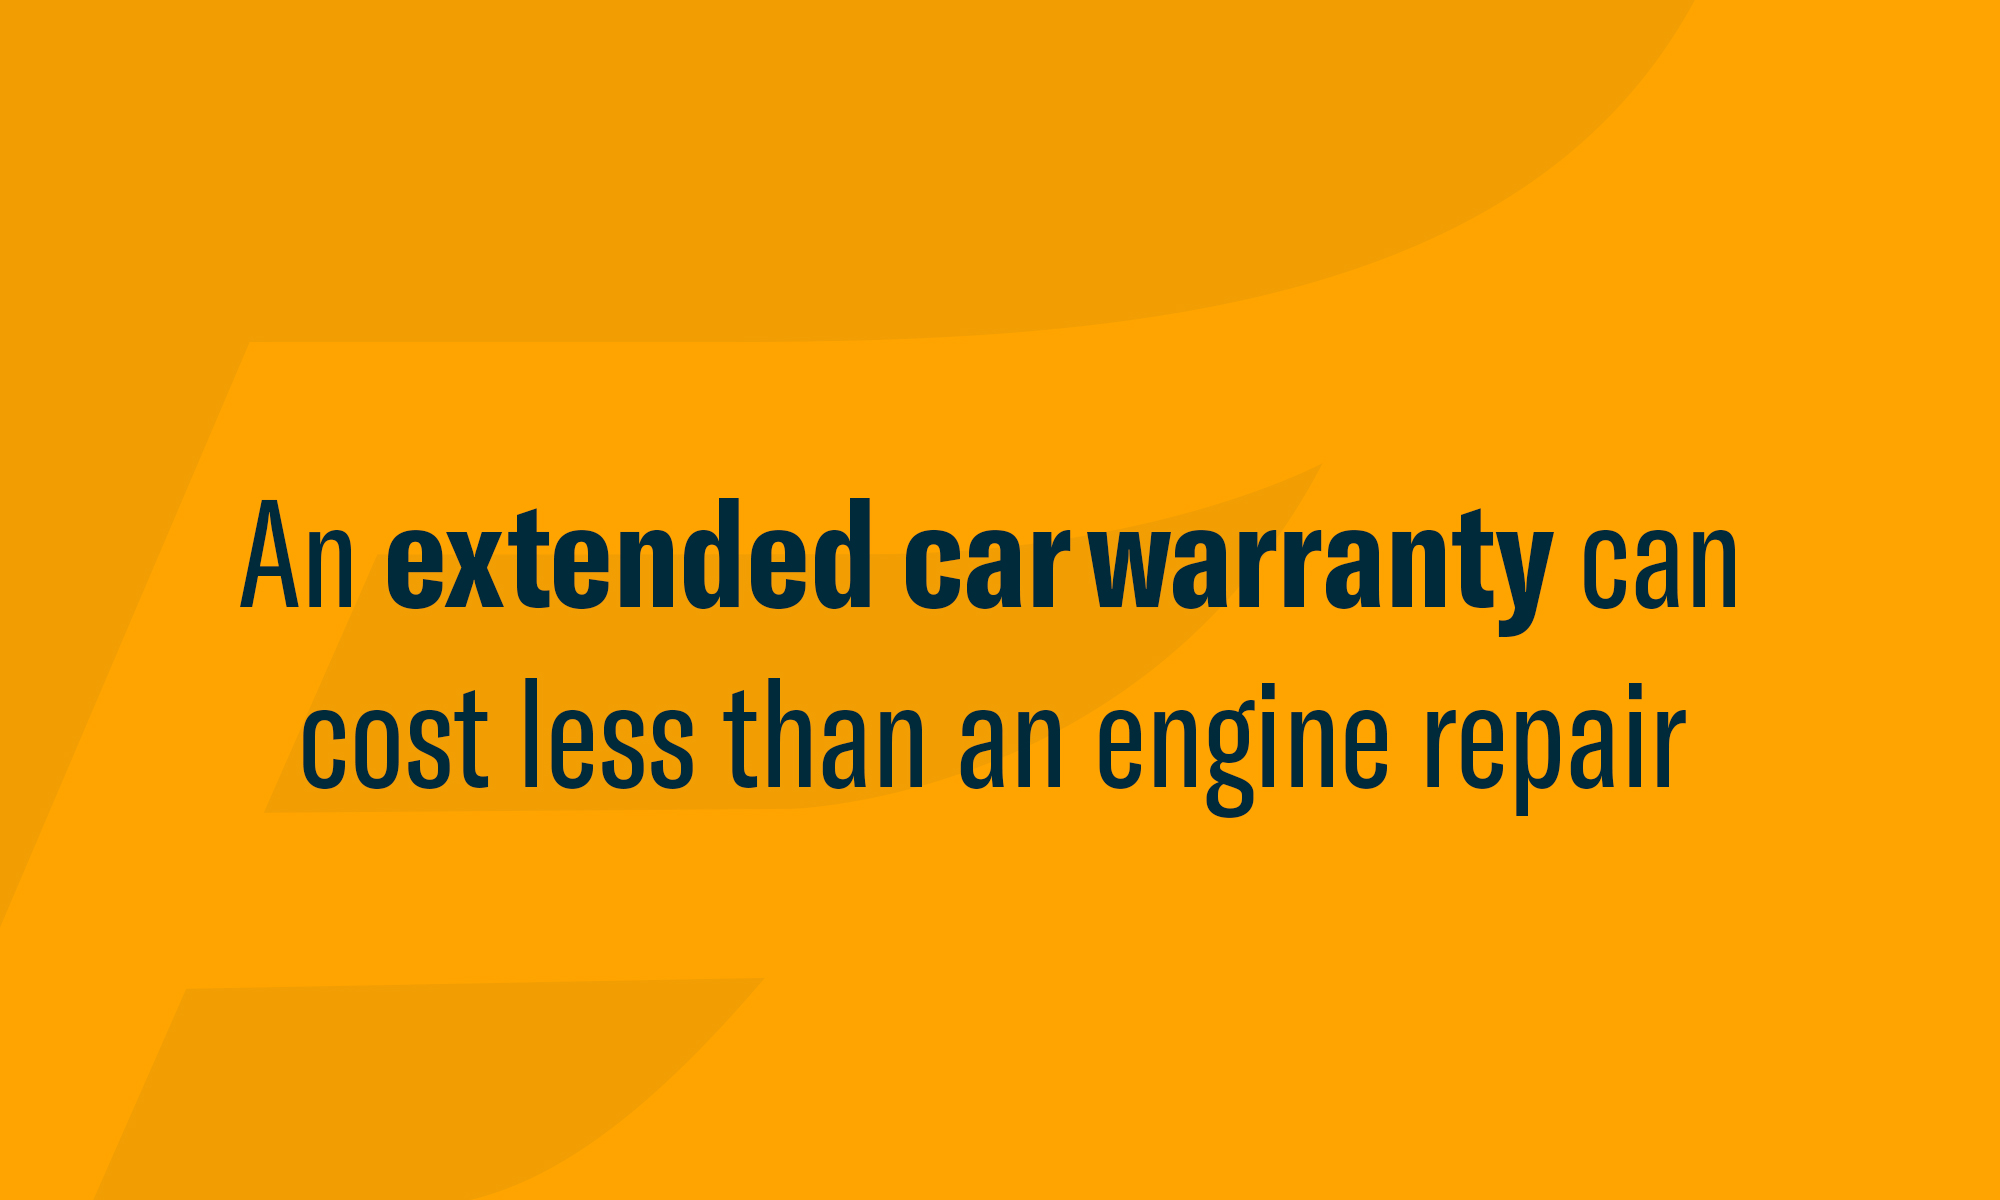 What Is The Average Cost Of An Extended Car Warranty? - Car Warranty SB